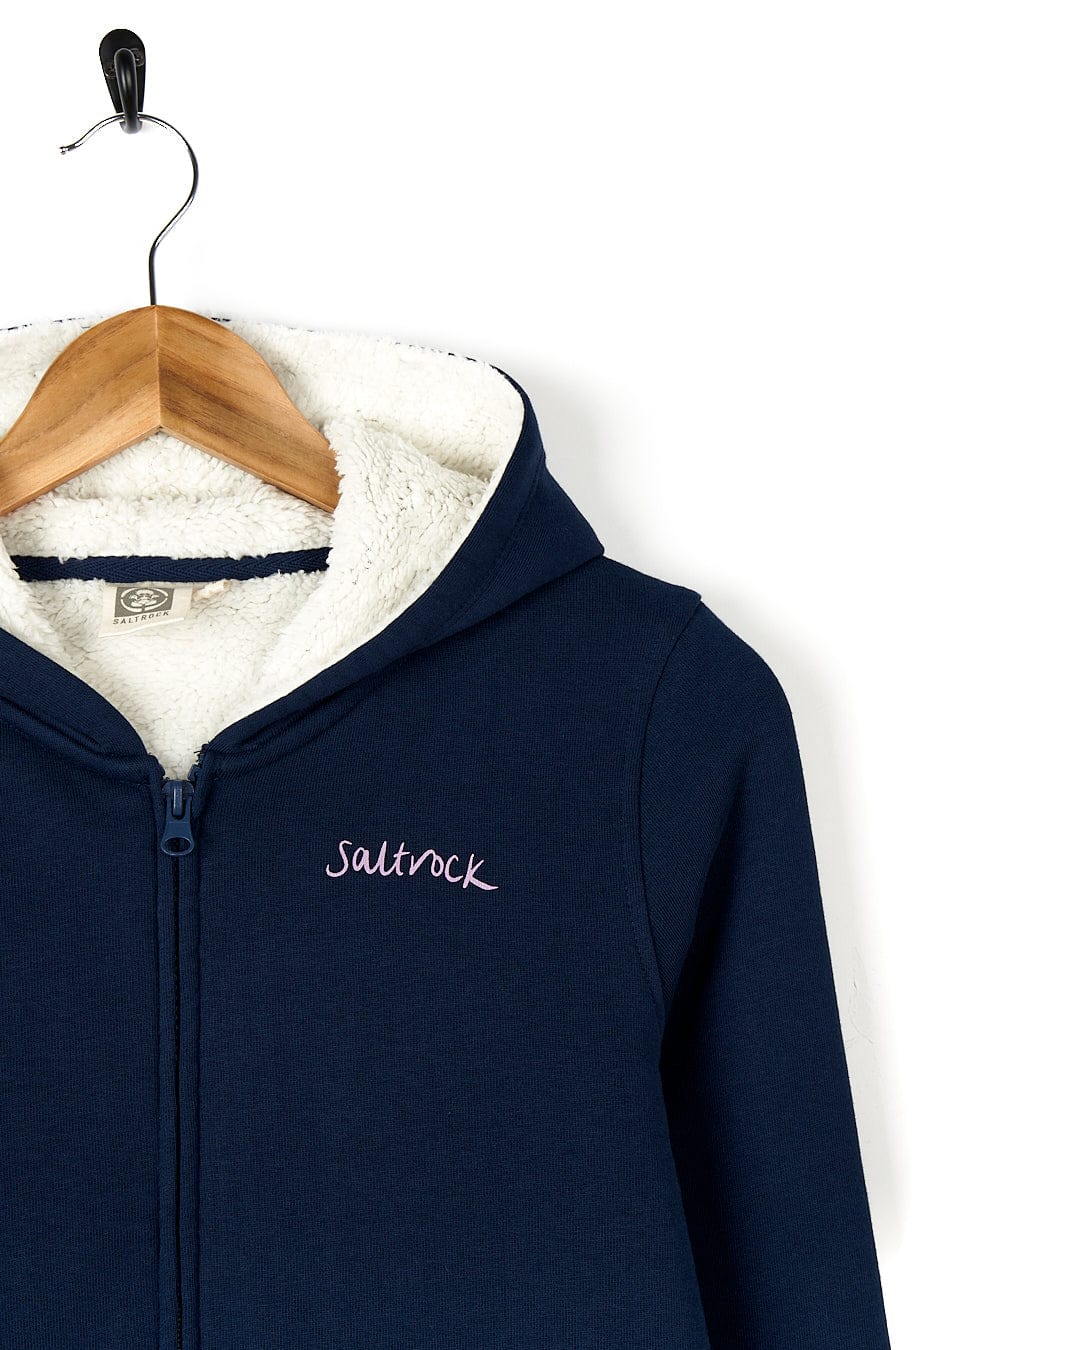 A Sup Girl - Kids Borg Lined Zip Hoodie - Dark Blue with the word 'joy' embroidered on it. Brand: Saltrock.